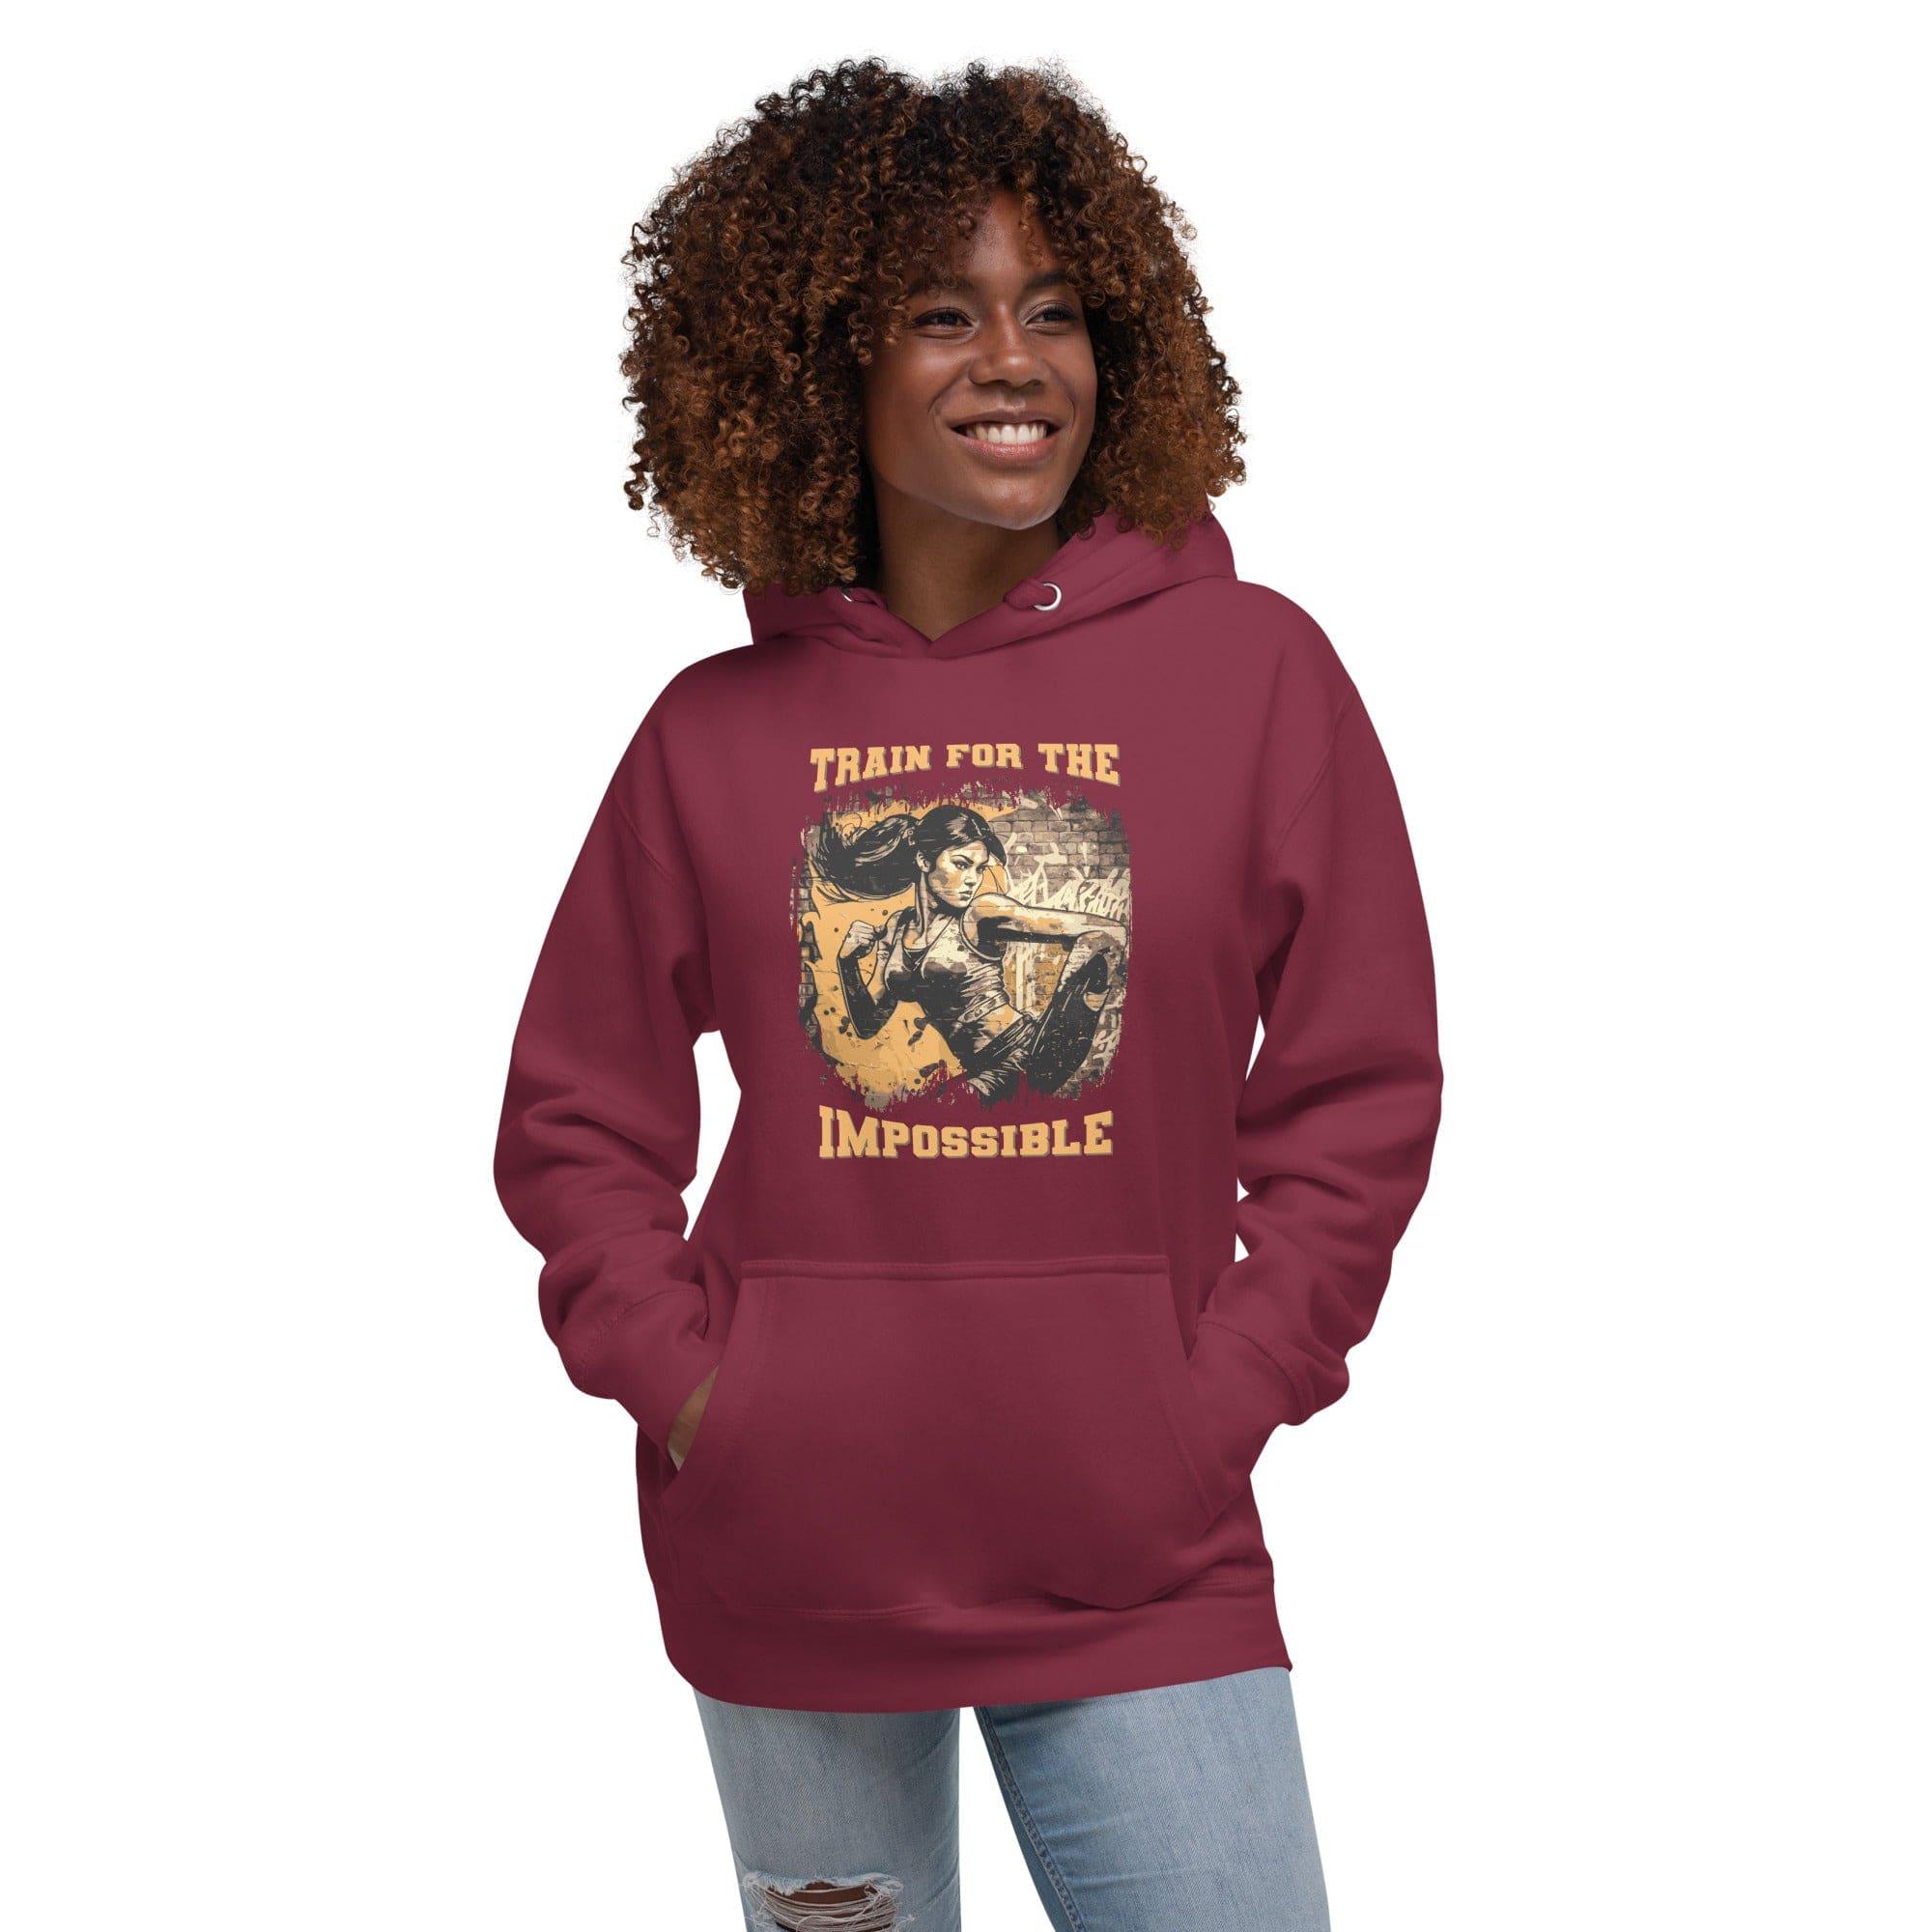 Train For The Impossible Unisex Hoodie - Beyond T-shirts